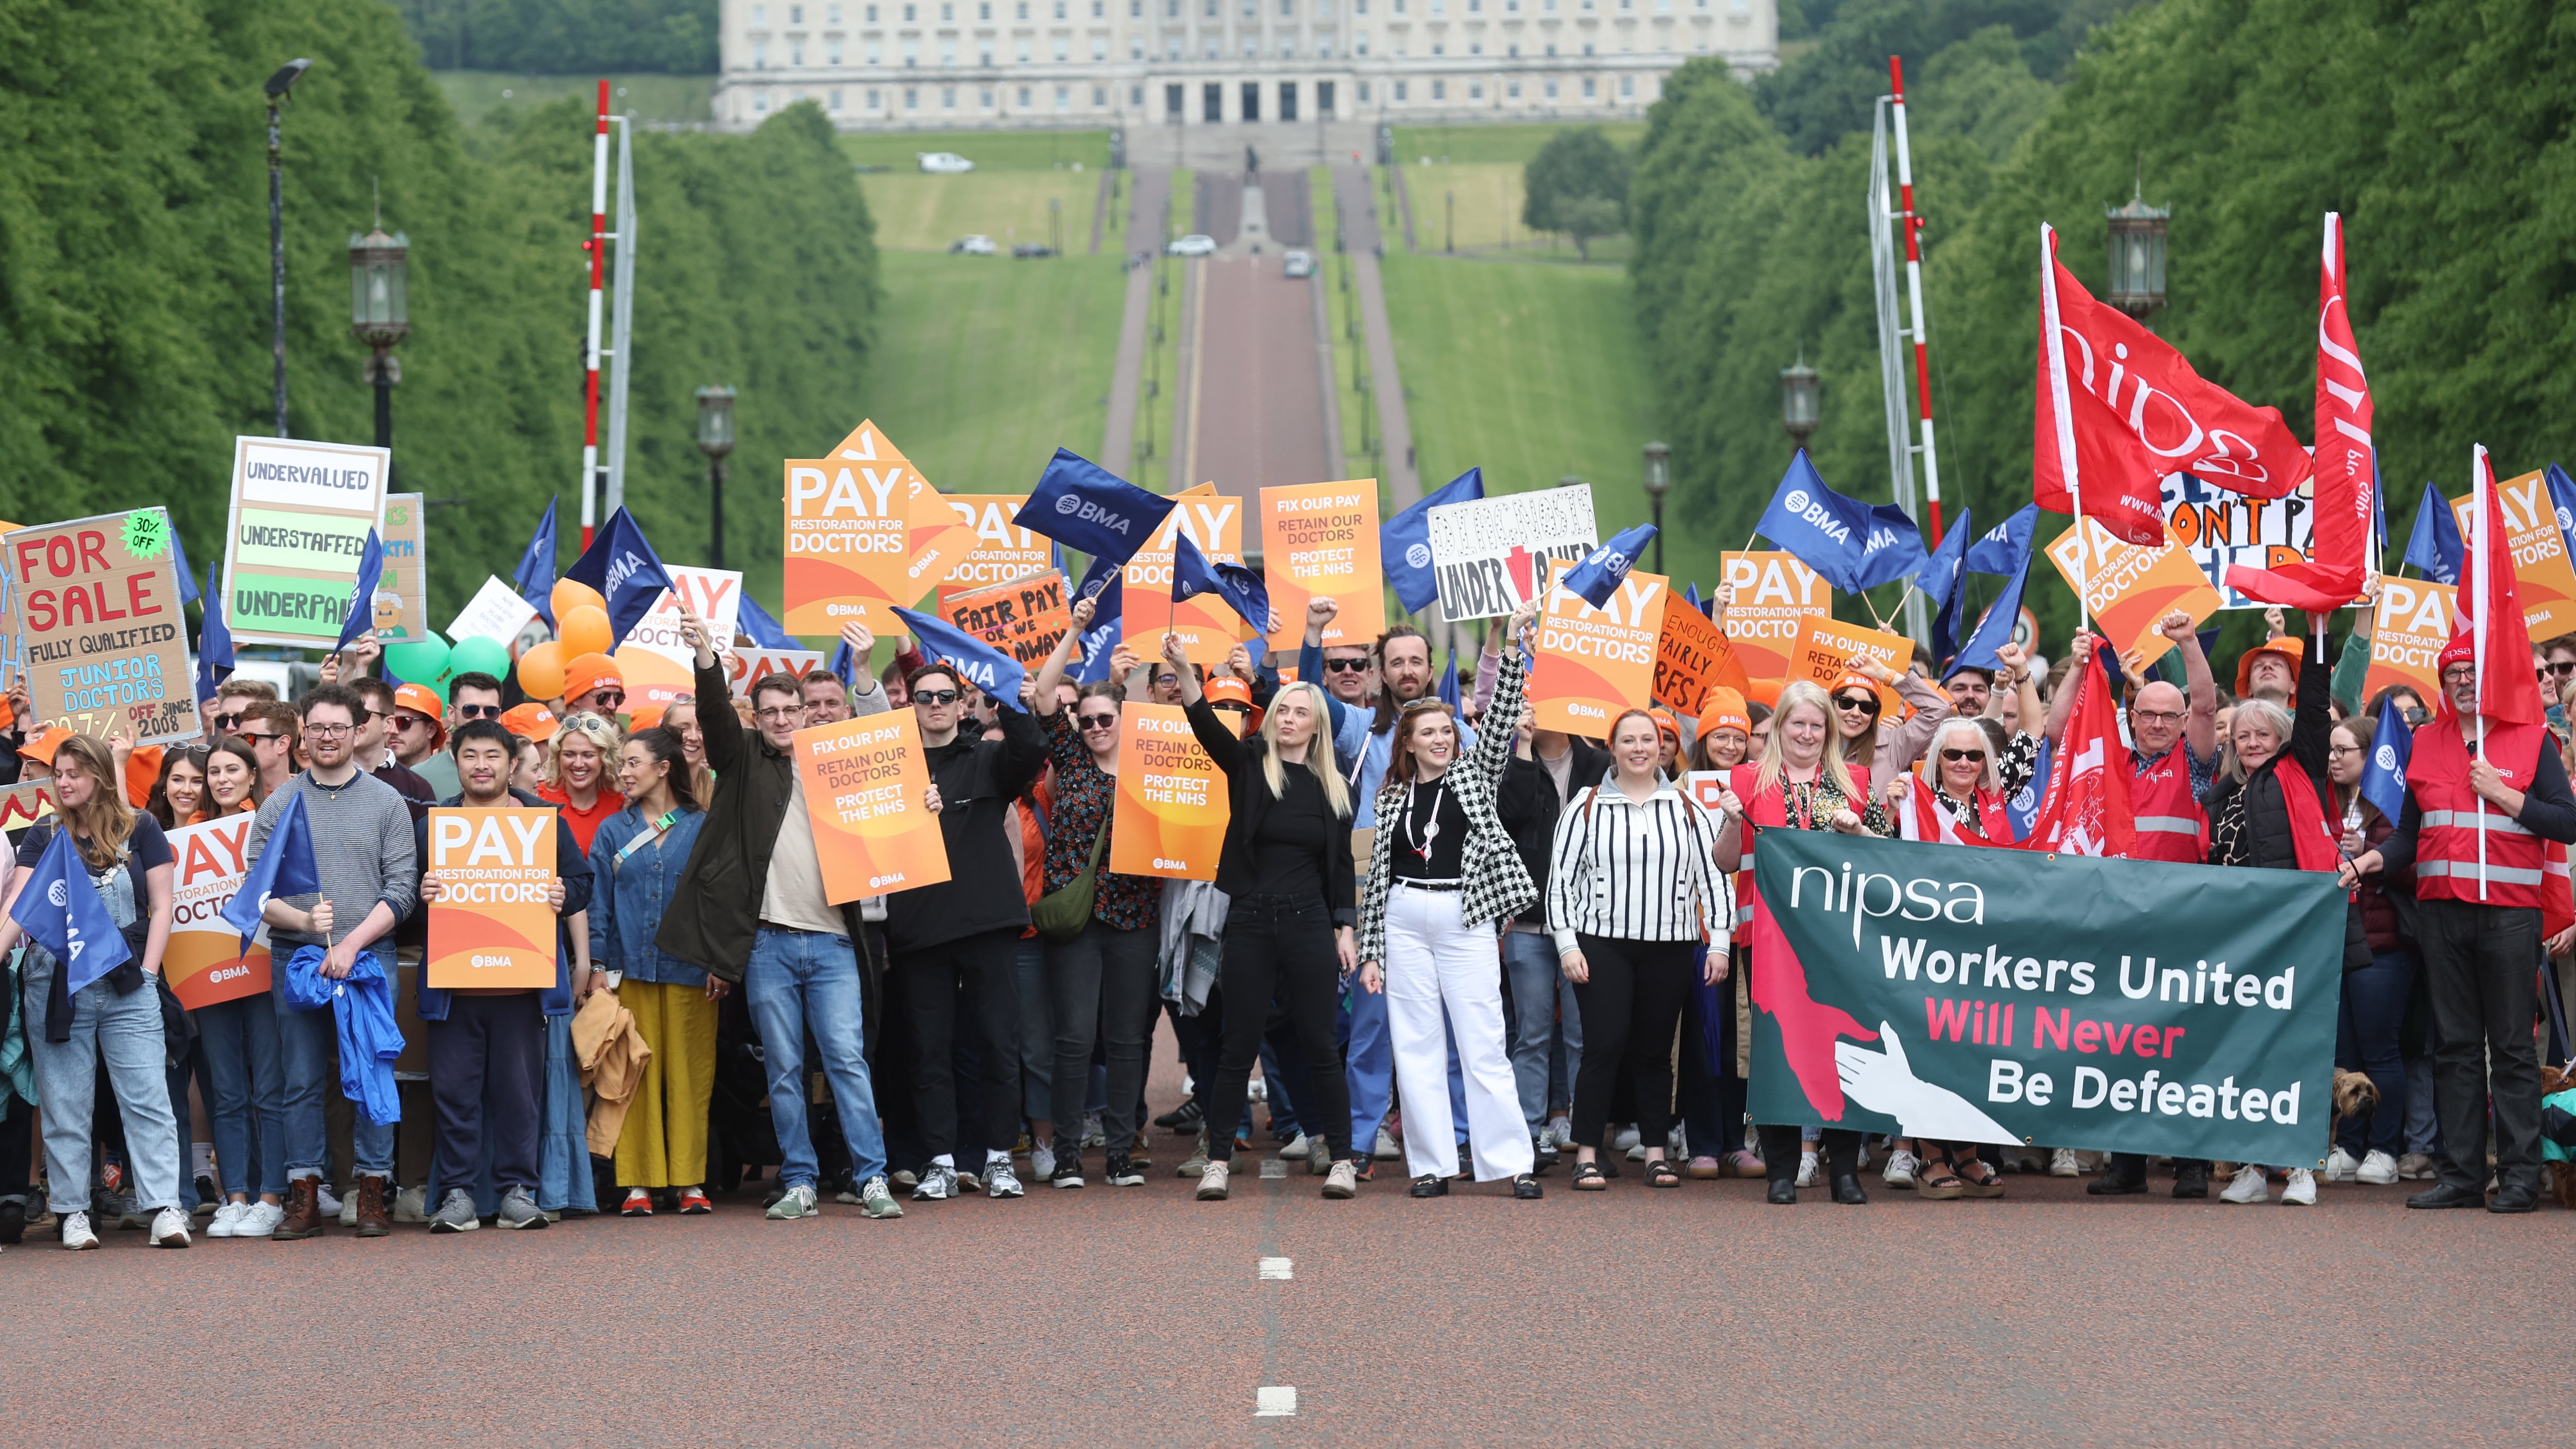 Junior doctors protest at Stormont in Belfast  in a dispute over pay.
The 48-hour full walkout runs from 07:00 BST on Thursday 6 June until 07:00 on Saturday 8 June.
PICTURE COLM LENAGHAN